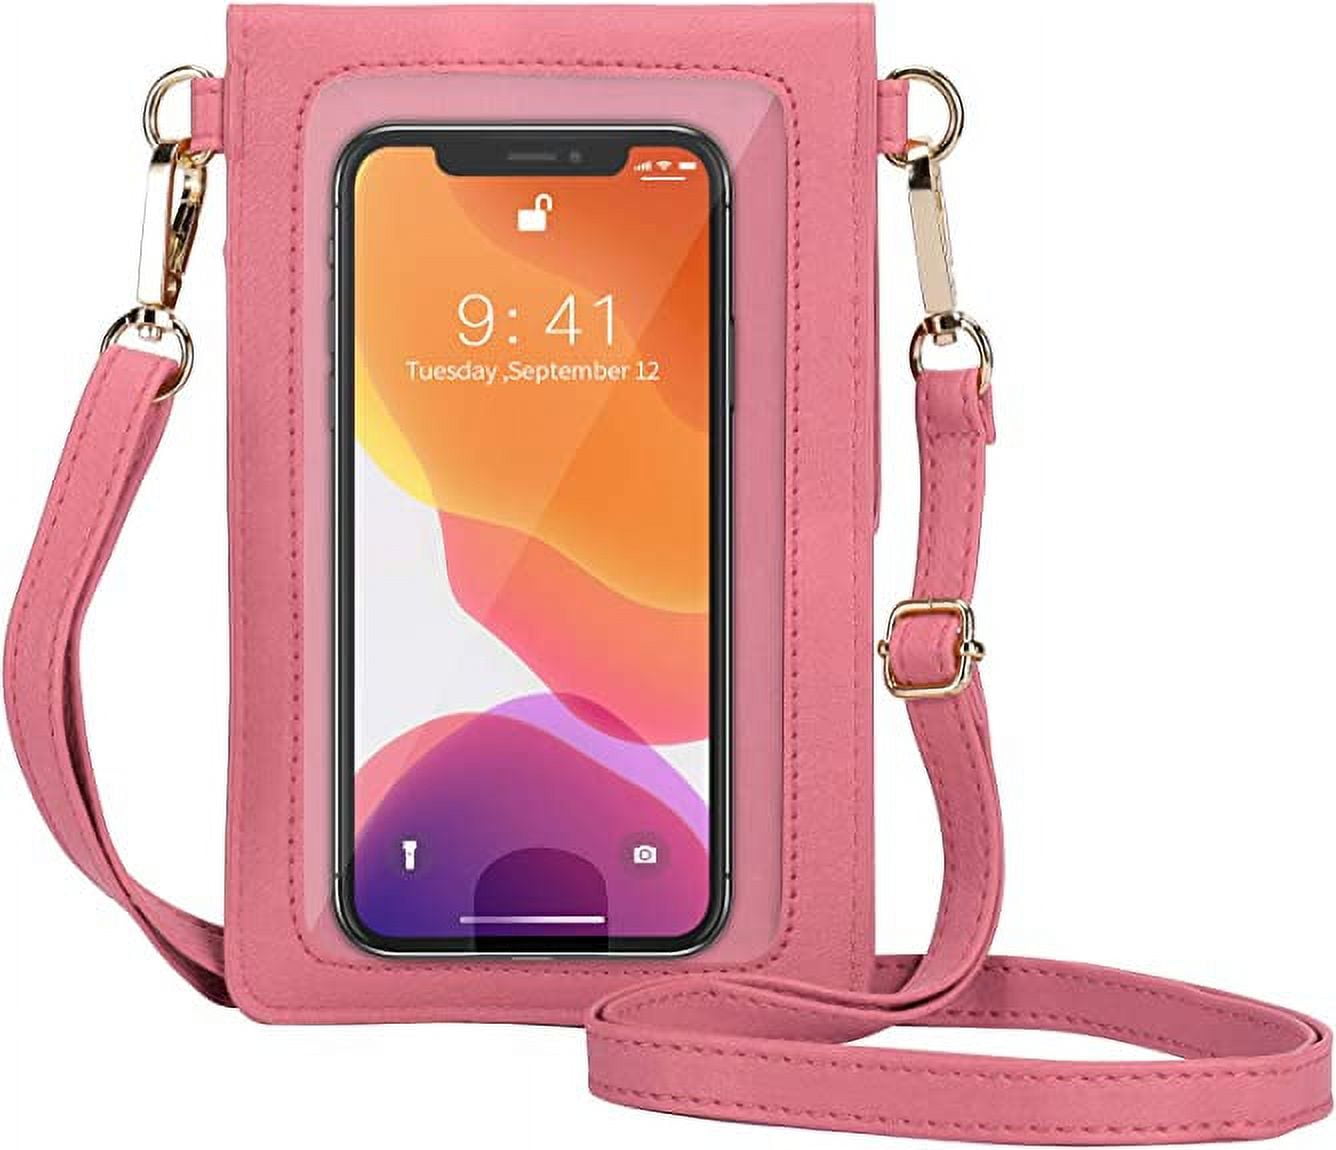 AnsTOP Touch Screen Cell Phone Purse Lightweight Shoulder Wallet PU Leather Phone Case Bag for Women Pink a6db761a 8eaa 4772 ac94 f9e141d30f71.964d1805dd7cf0407ff04cefaa60fed7